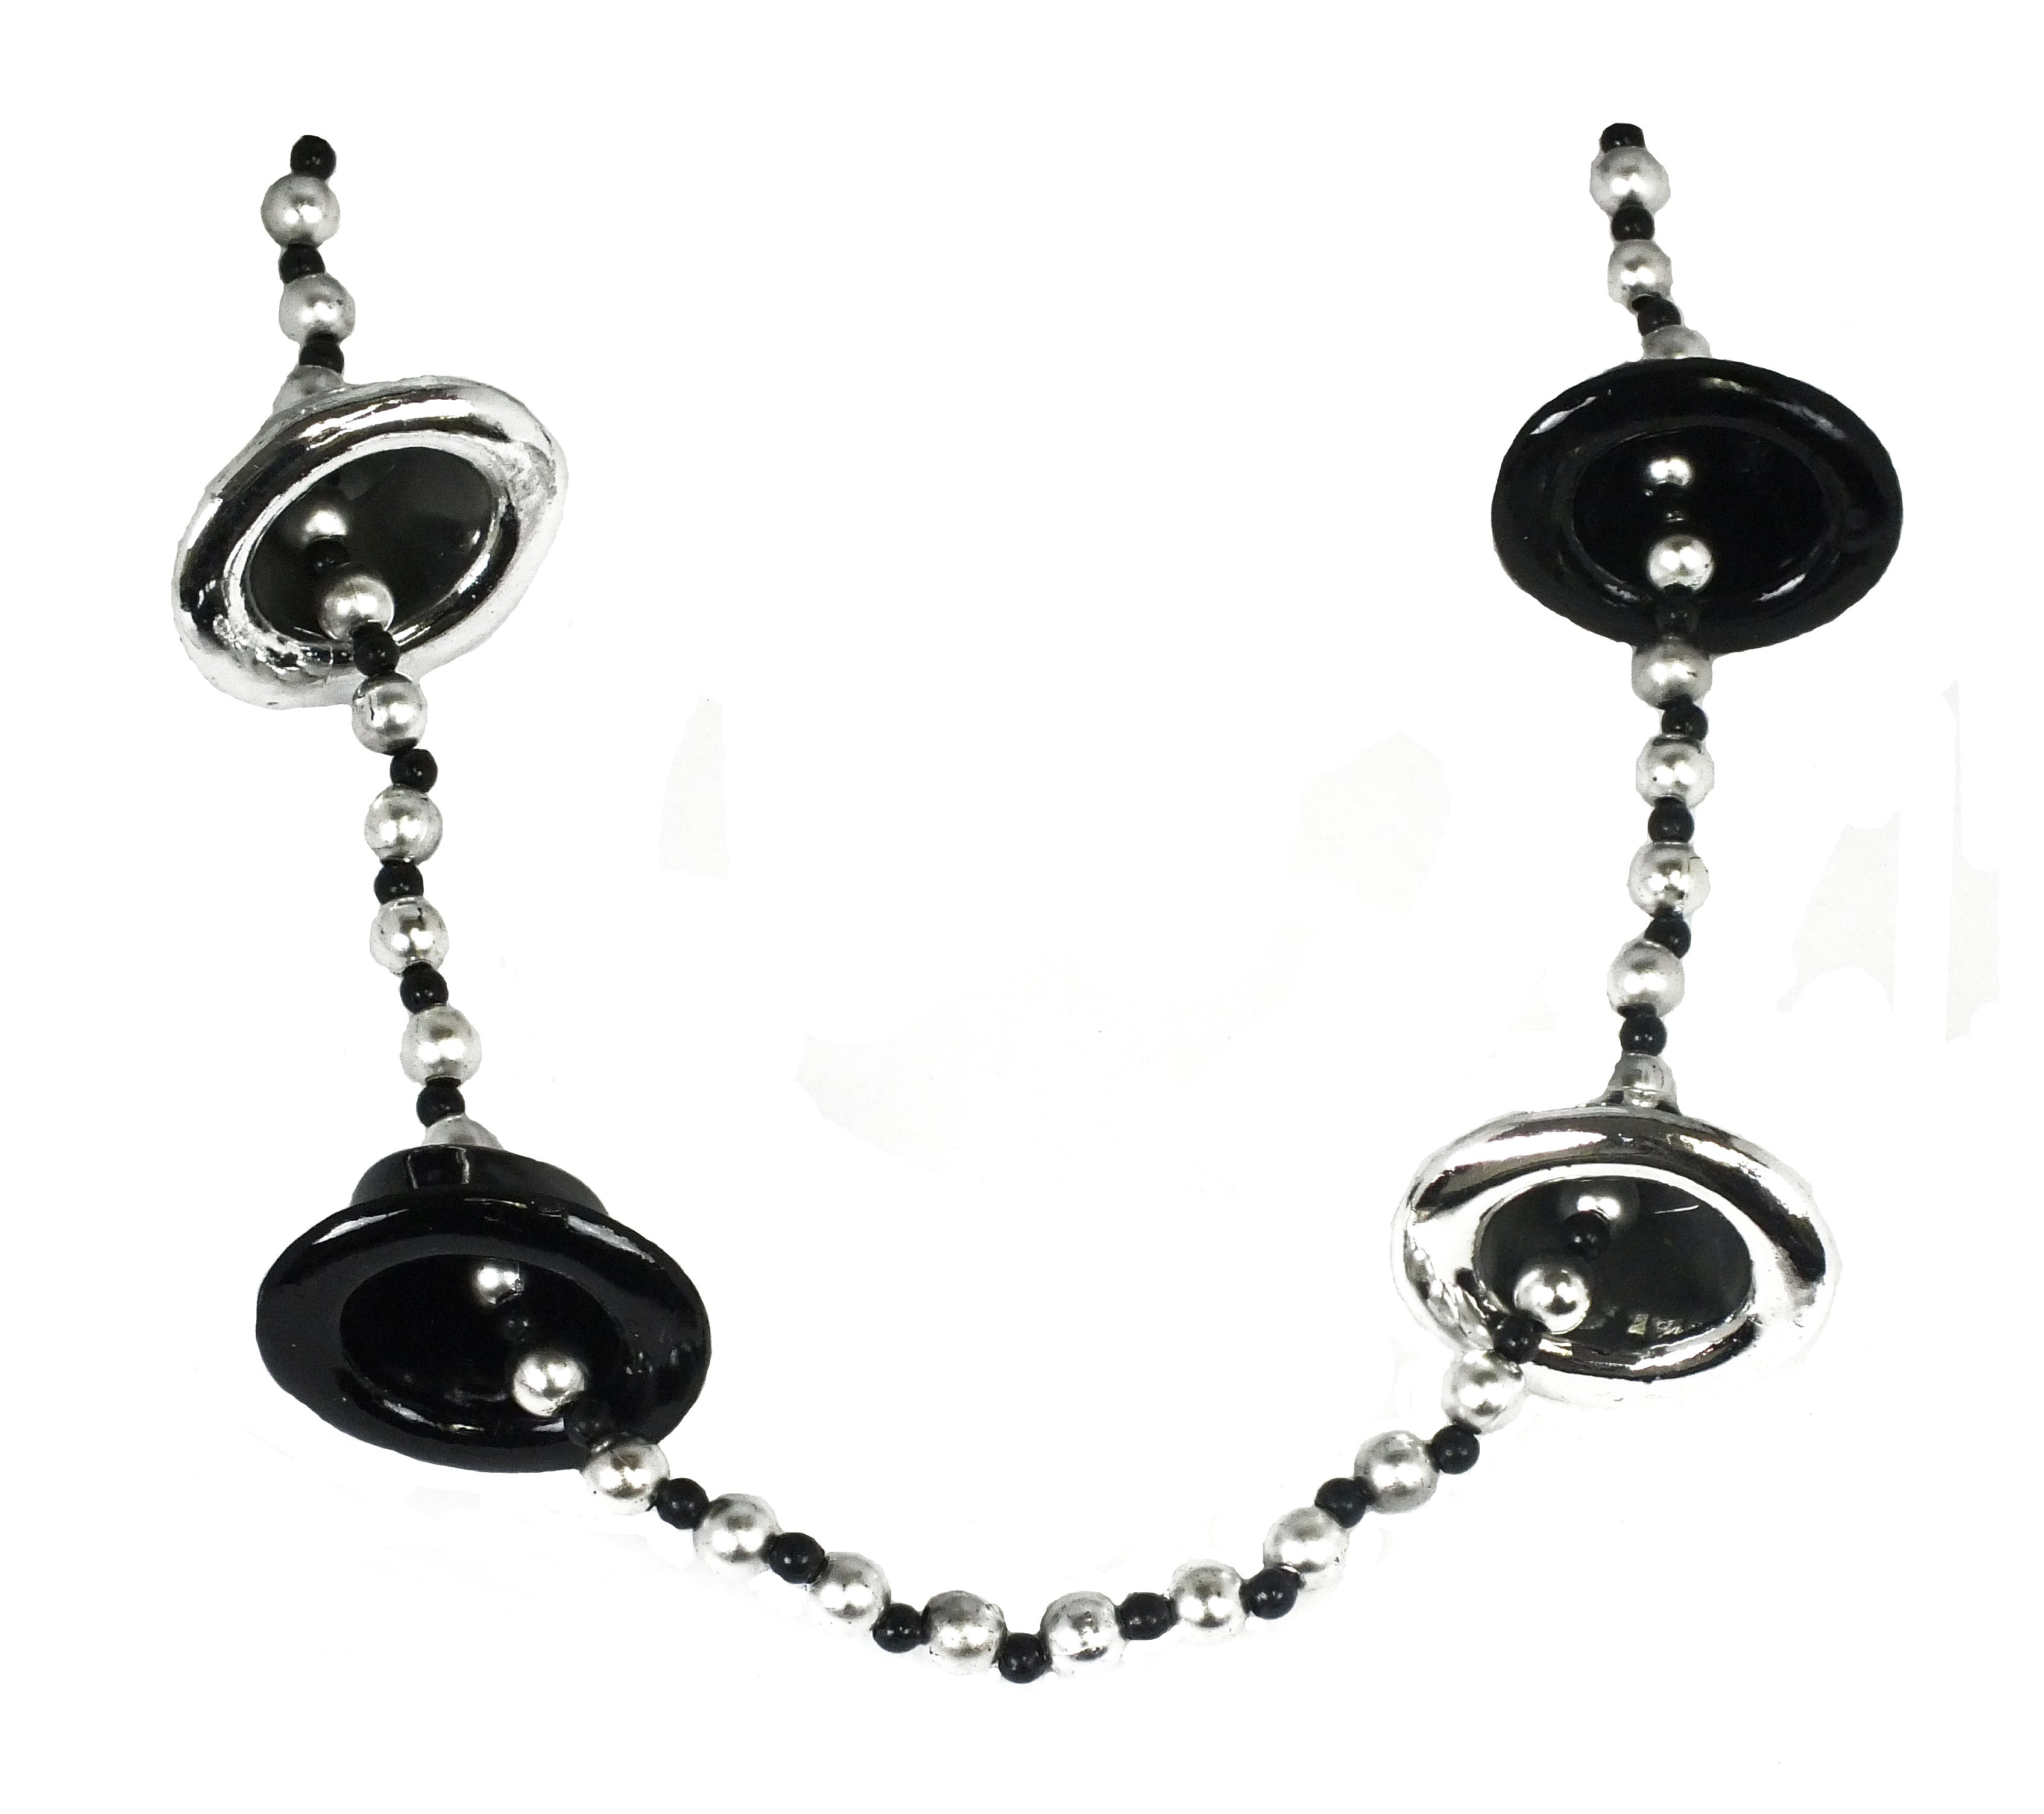 42" Top Hats with Black and Silver Beads